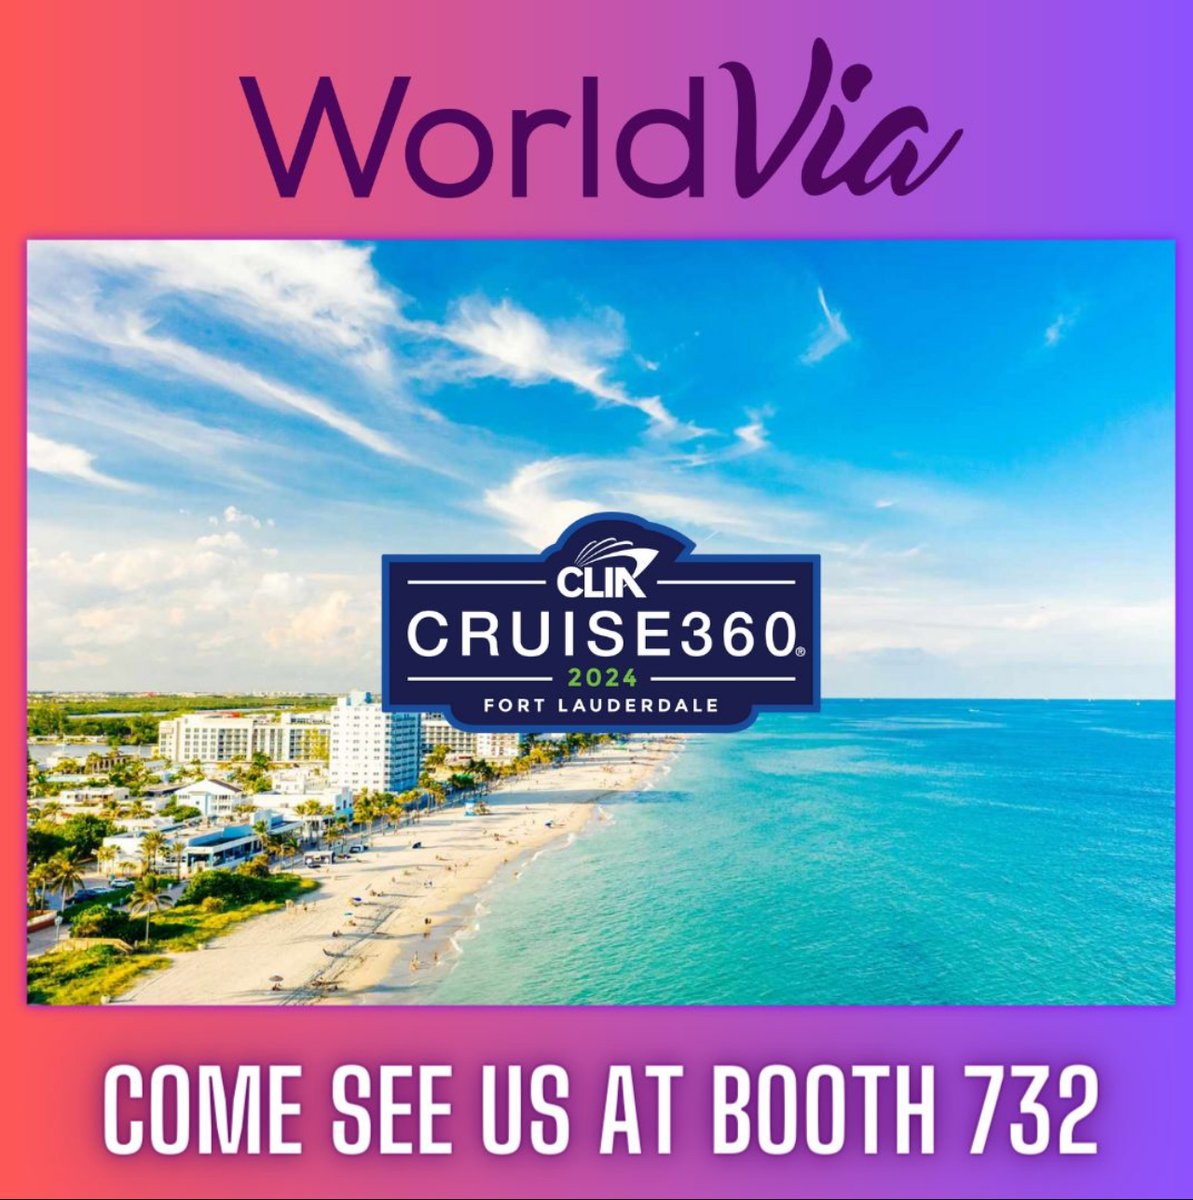 If you're at Cruise360's Trade Show in Fort Lauderdale, stop by. We'd love to see you. 

#weAREcruise @LoveTravelLiveTravel